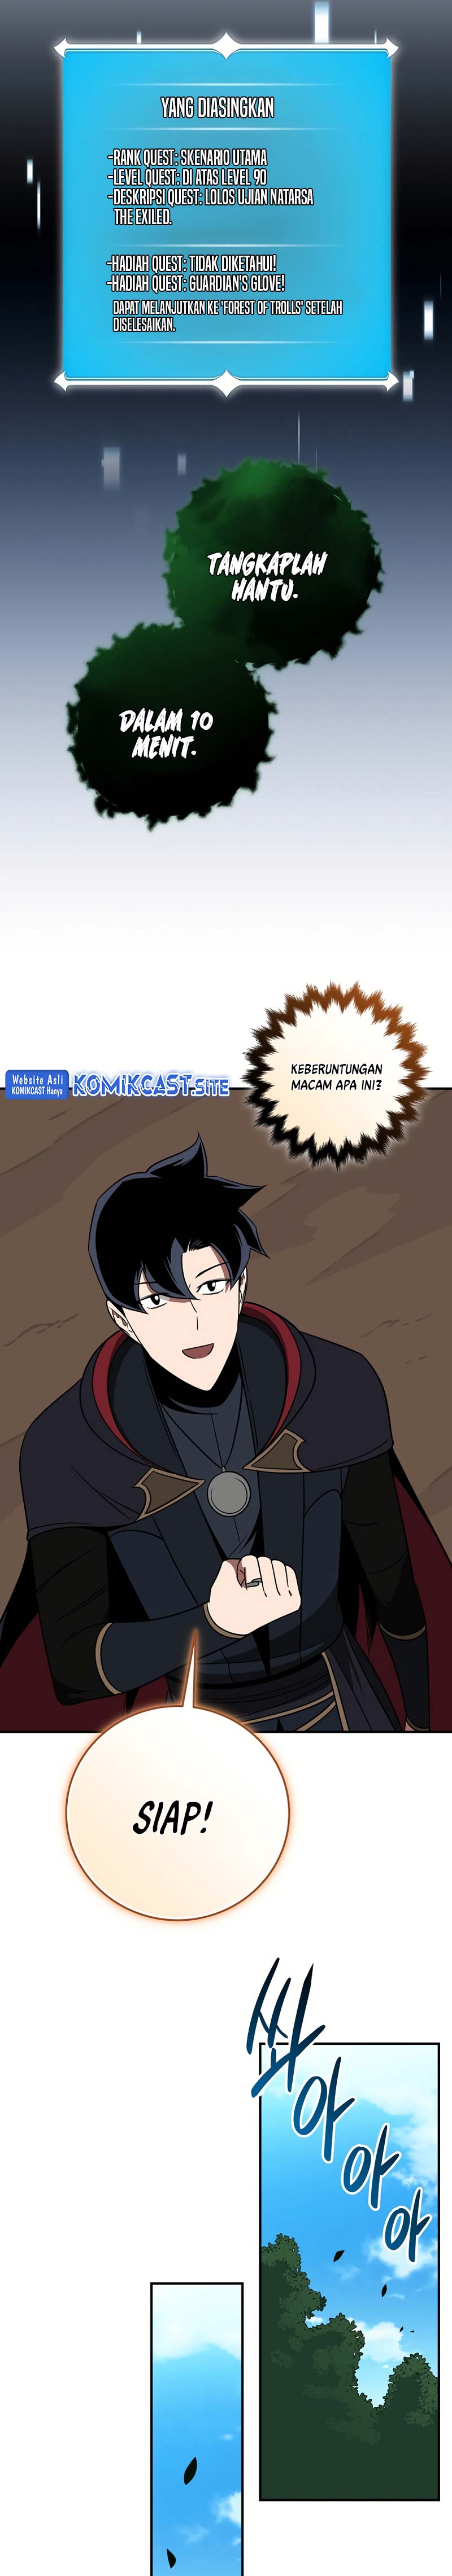 Archmage Streamer Chapter 67